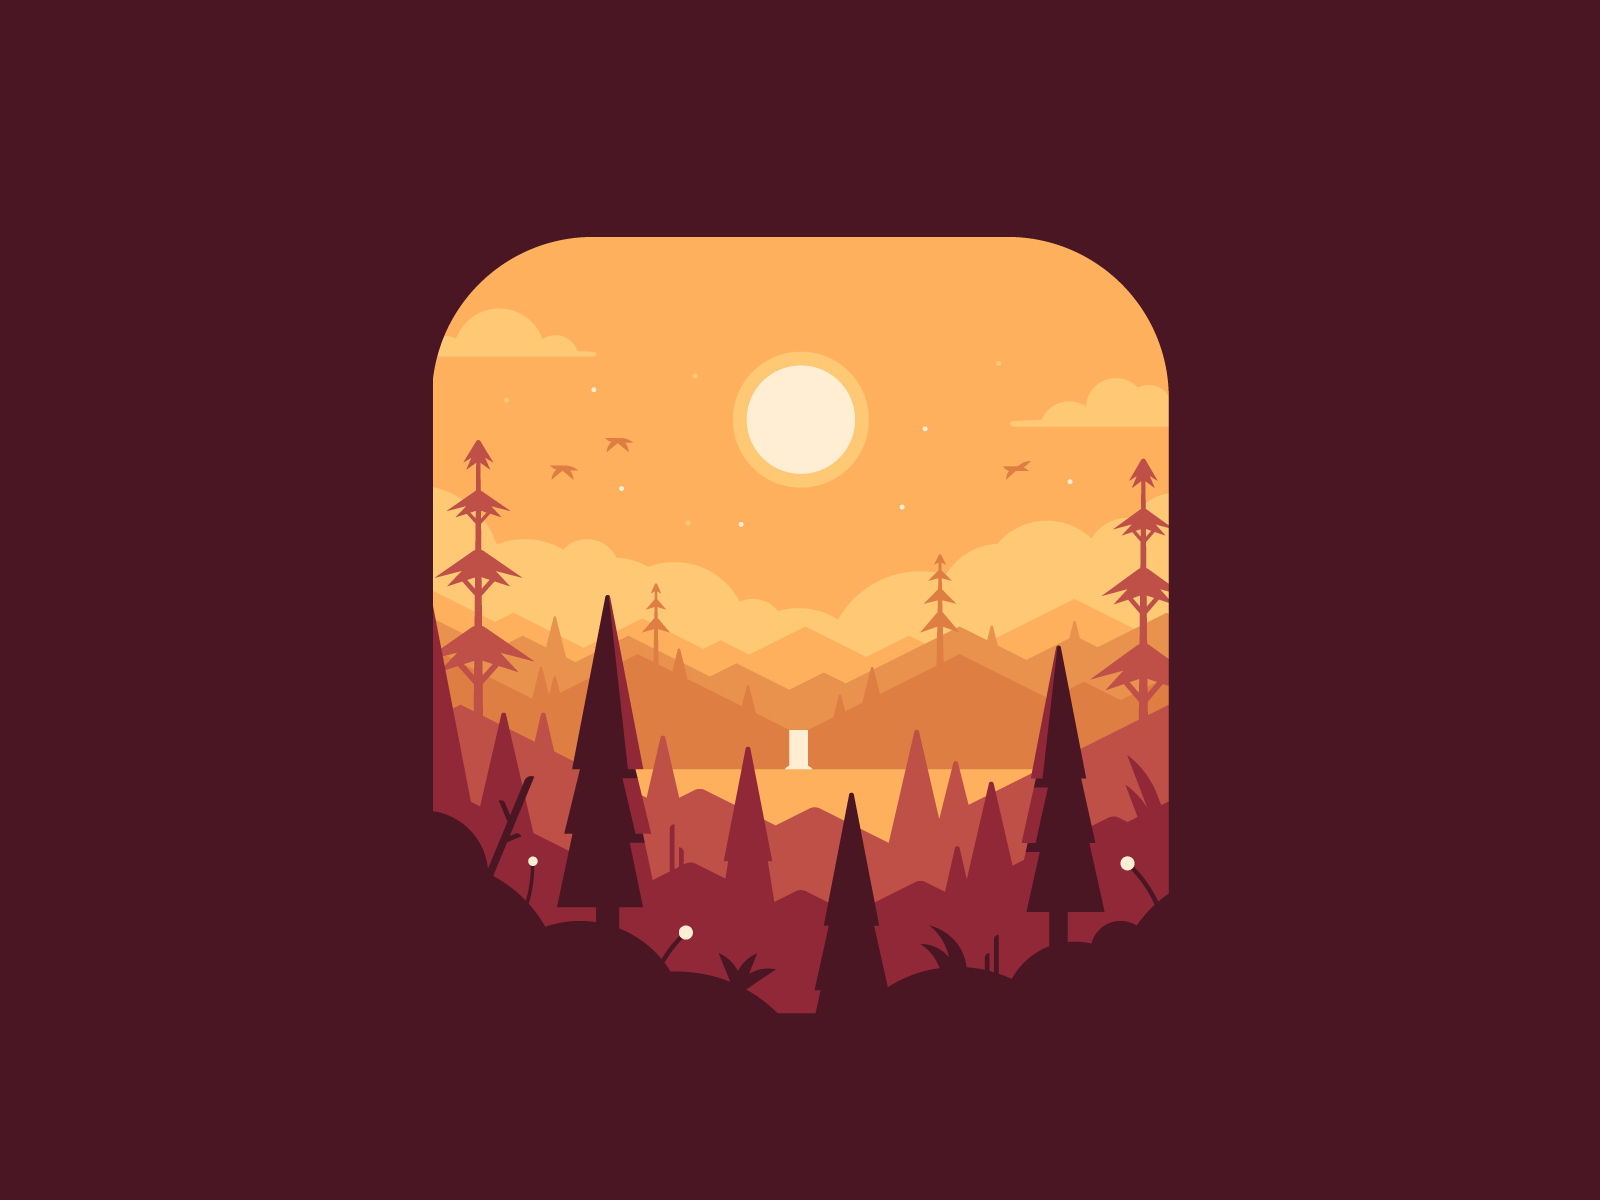 Warm Landscape Study by Matt Anderson for Canopy on Dribbble